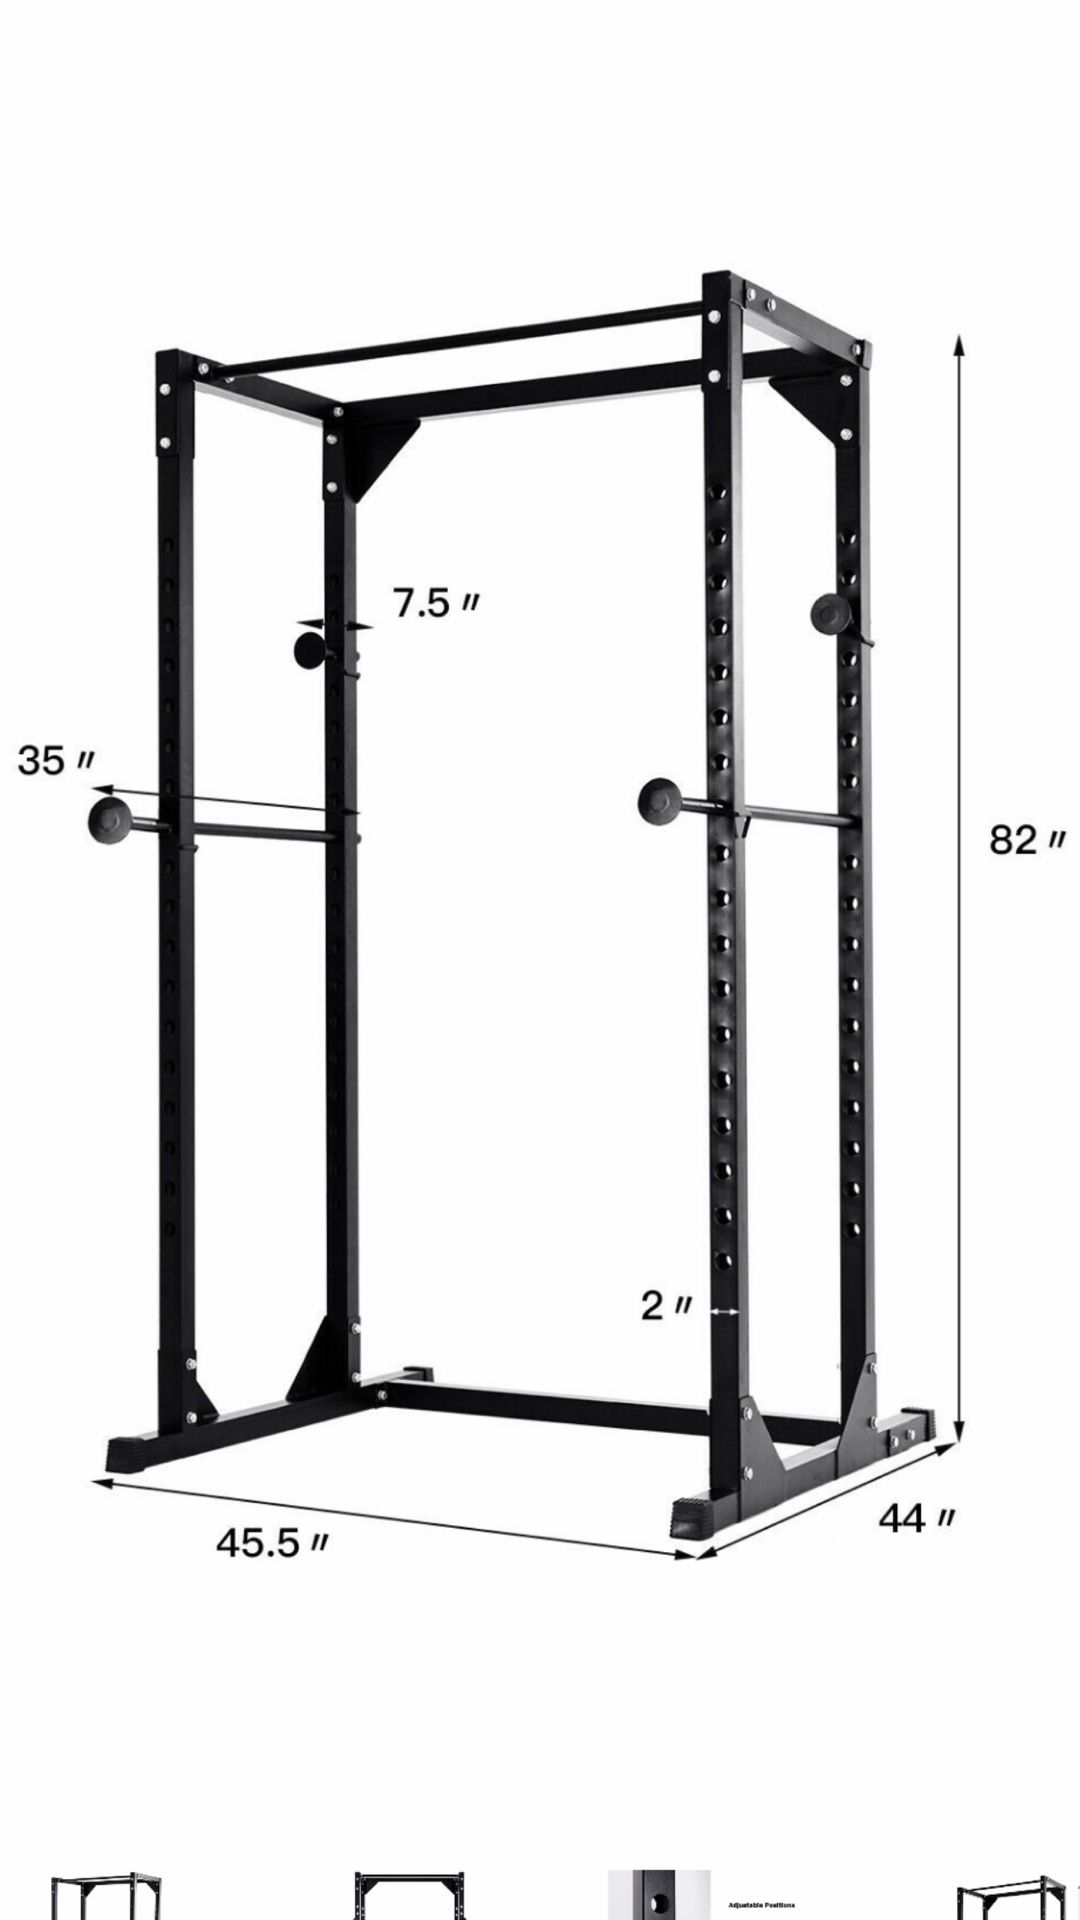 Costway Adjustable Dumbbell Rack Cage Chin up Squat Stand Fitness Strength Traning Gym New in box